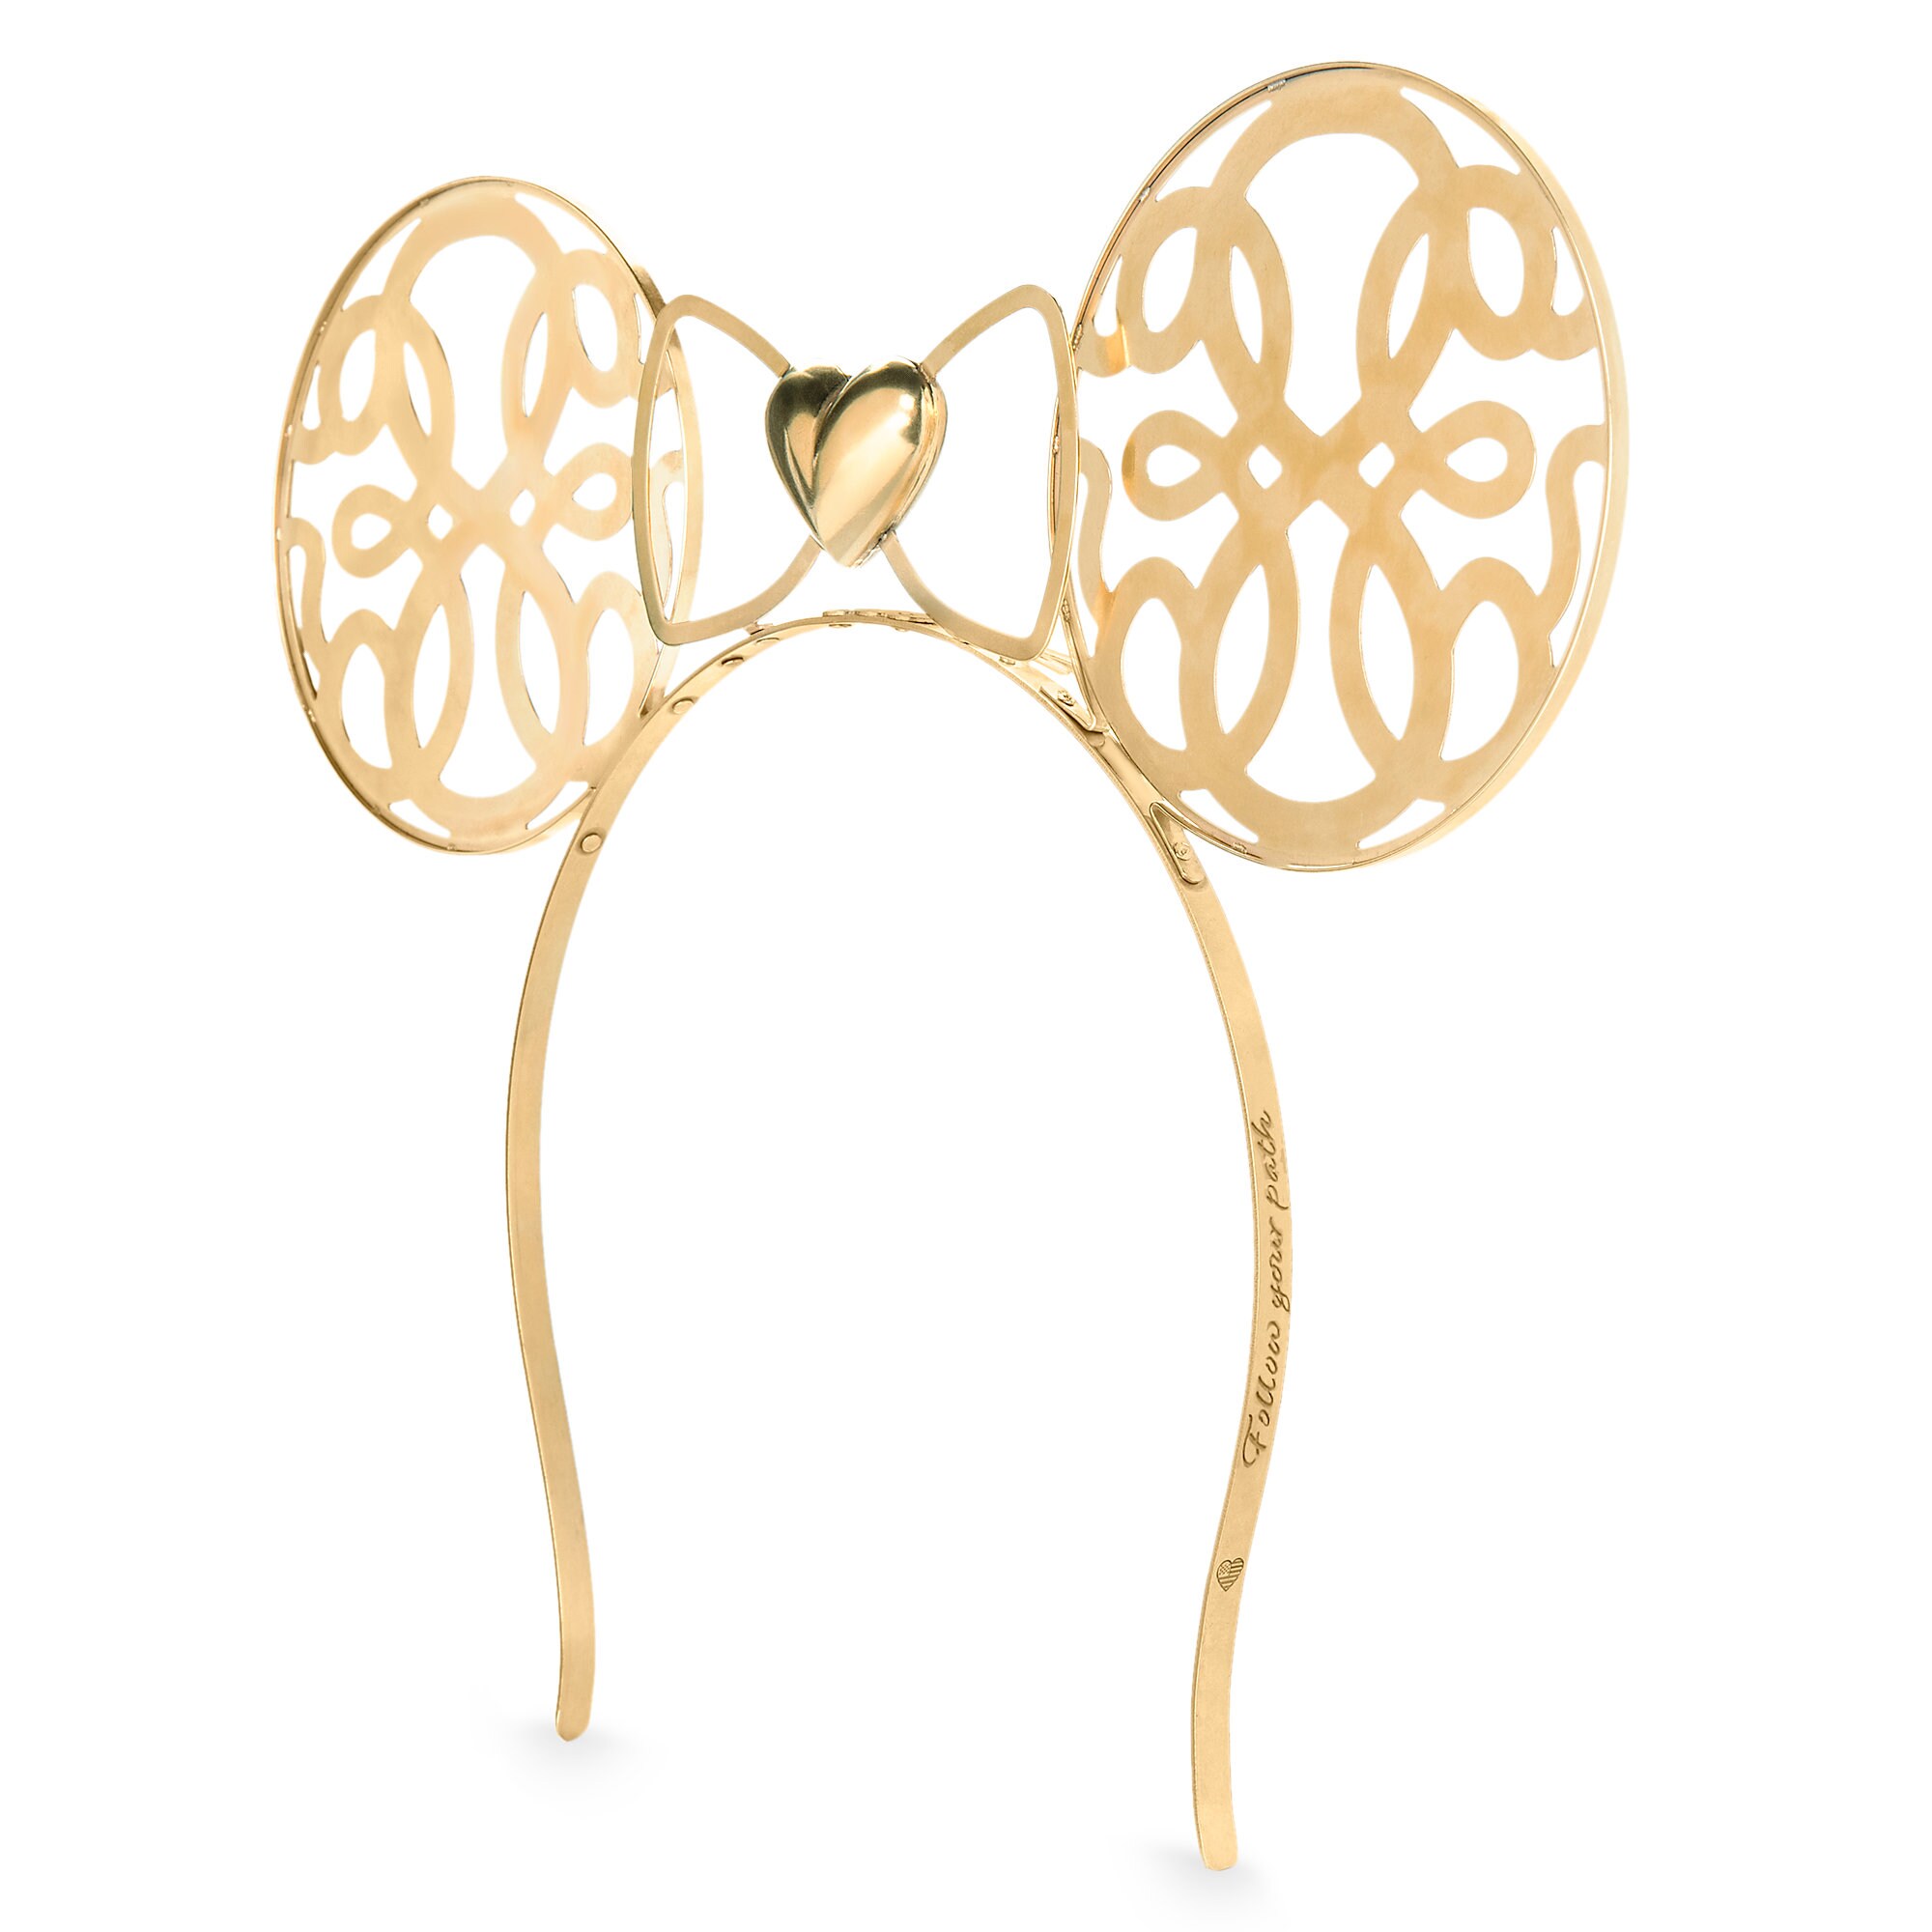 Minnie Mouse Metal Ear Headband by Alex and Ani - Limited Release